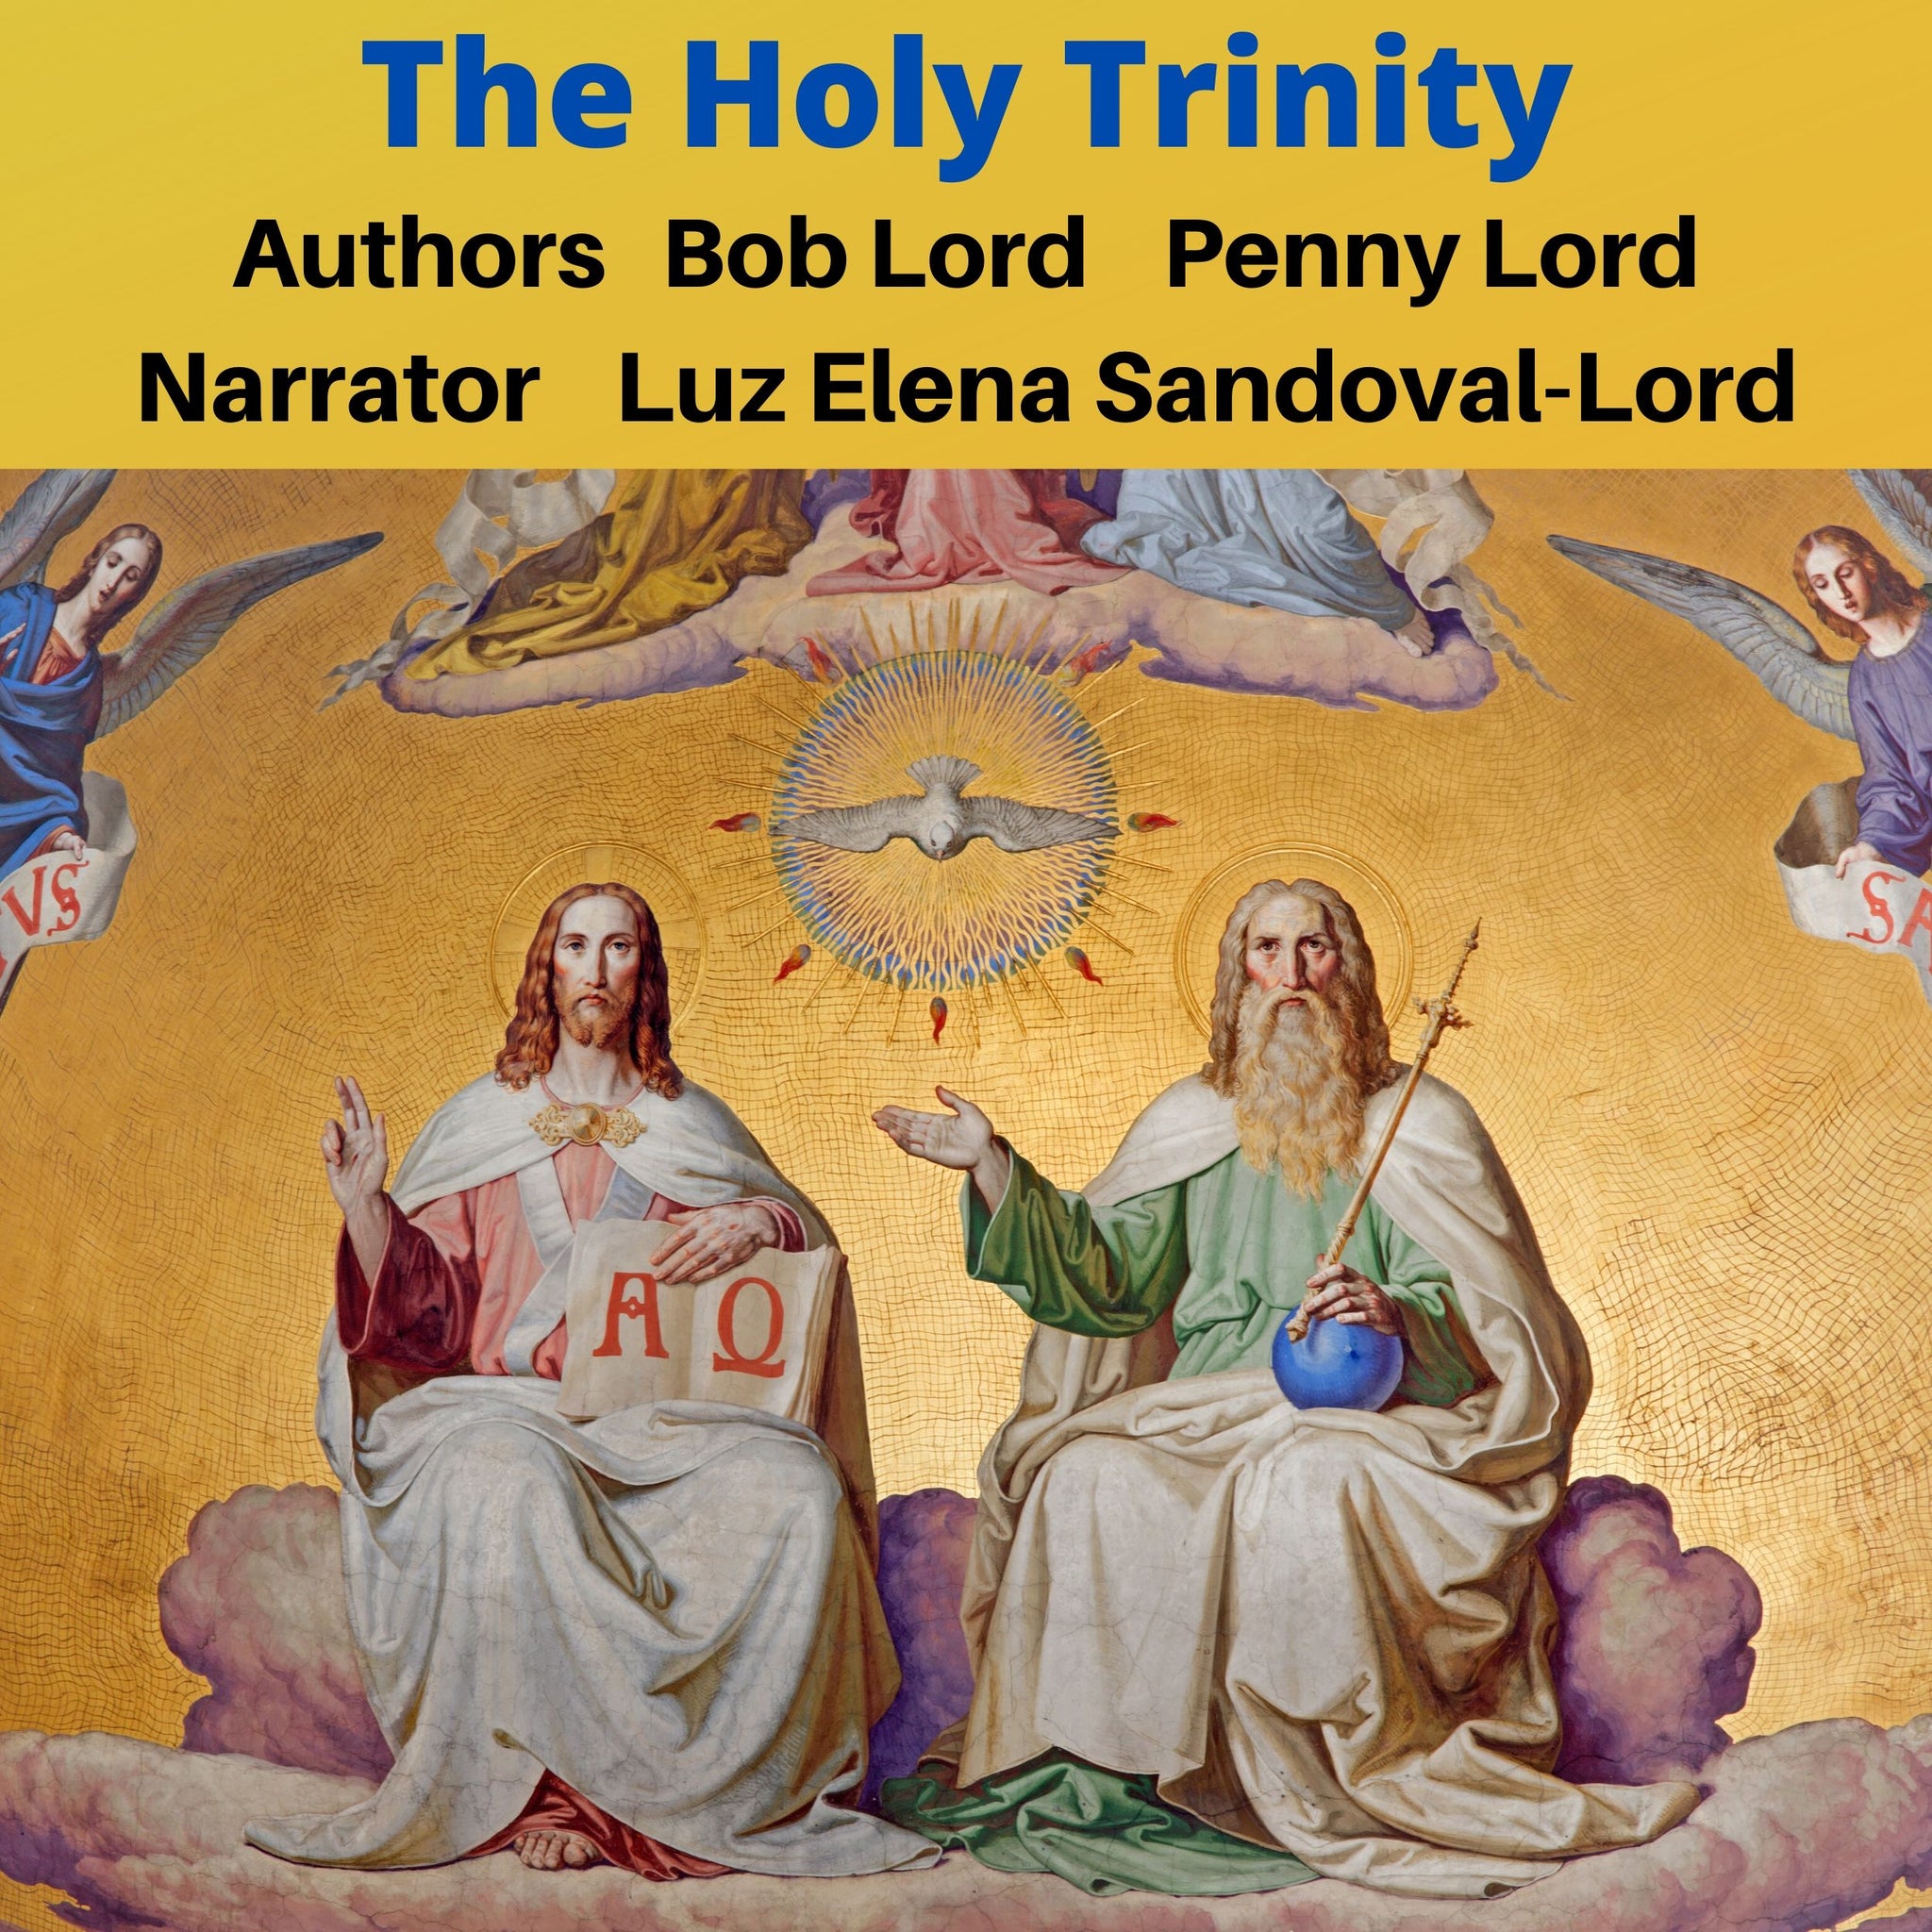 The Holy Trinity Audiobook - Bob and Penny Lord